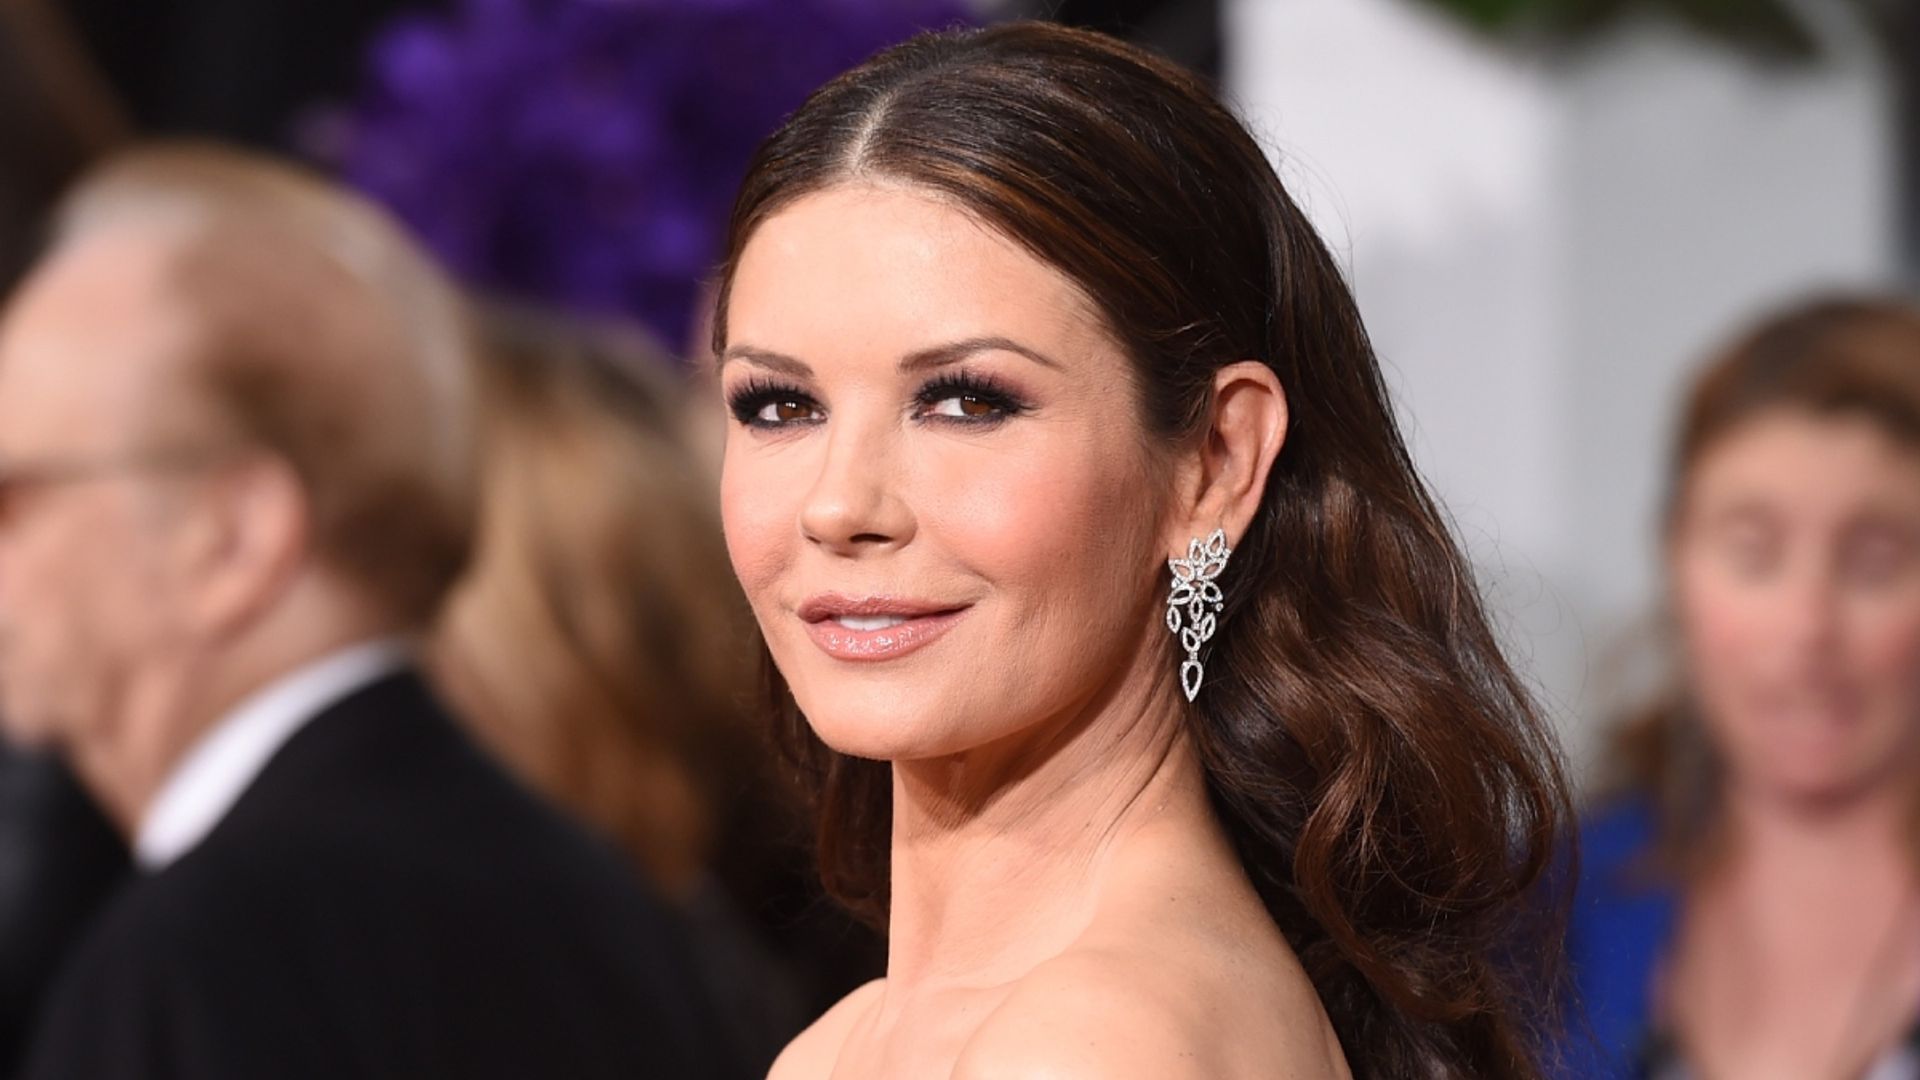 Catherine Zeta-Jones shows off phenomenal dance moves in workout gear